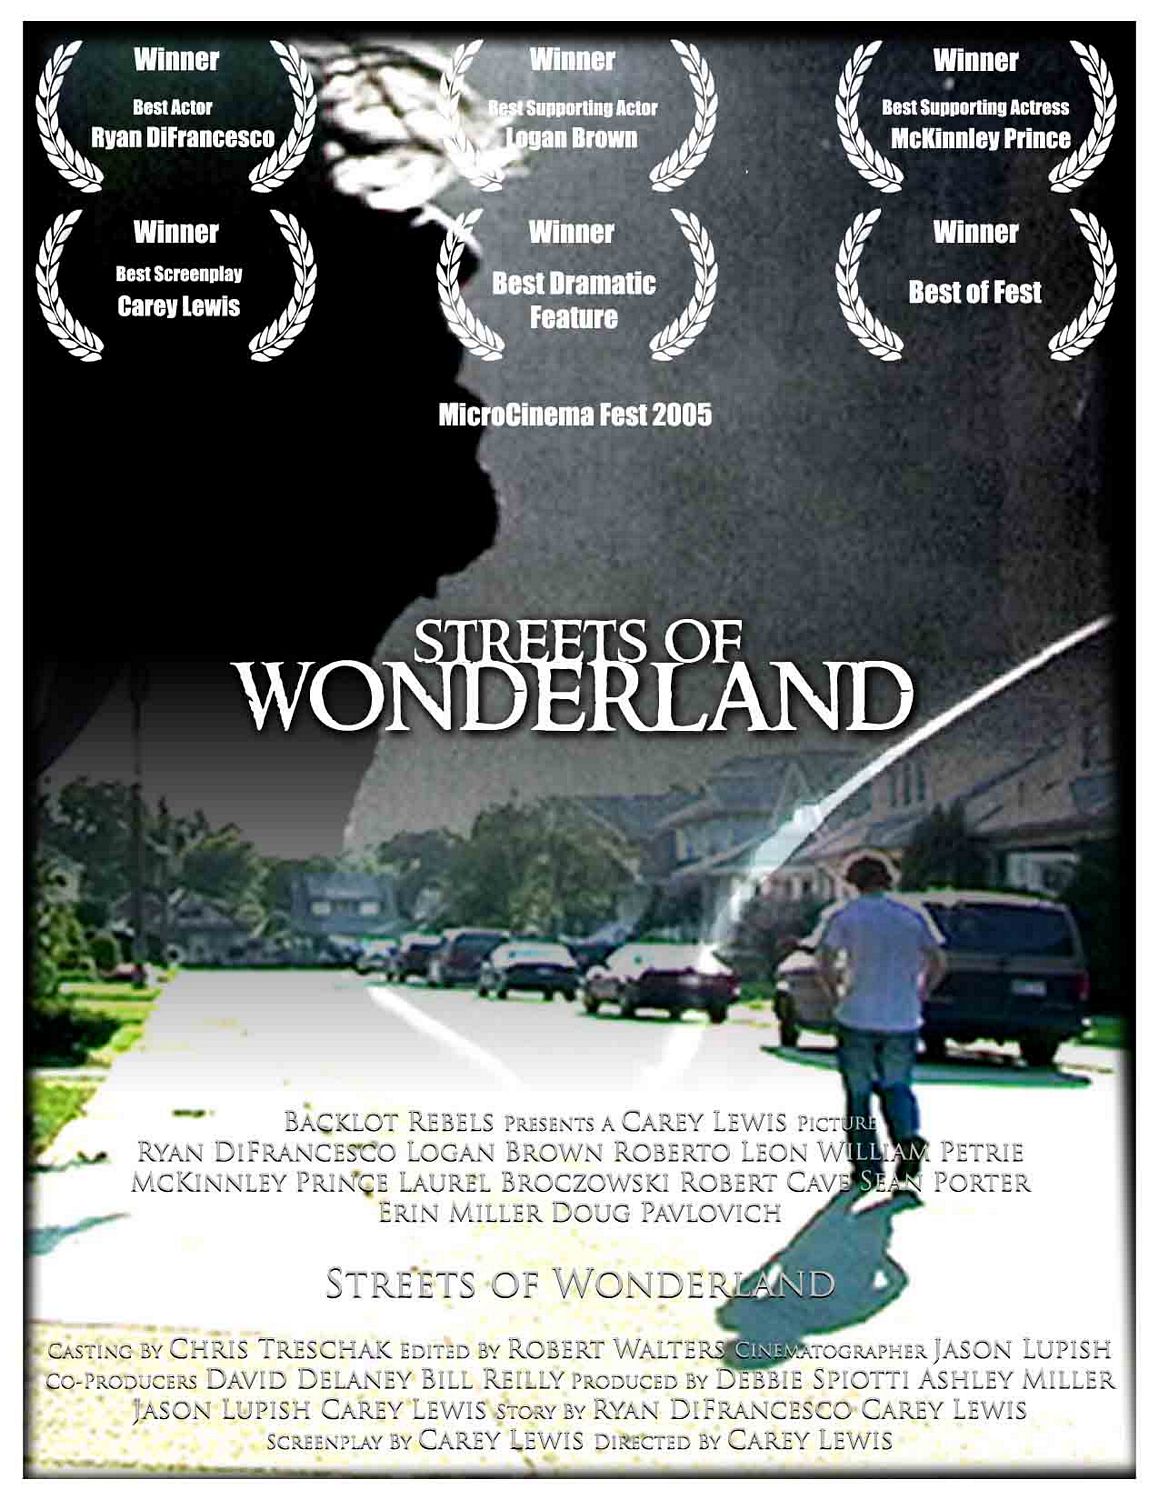 Extra Large Movie Poster Image for Streets of Wonderland 